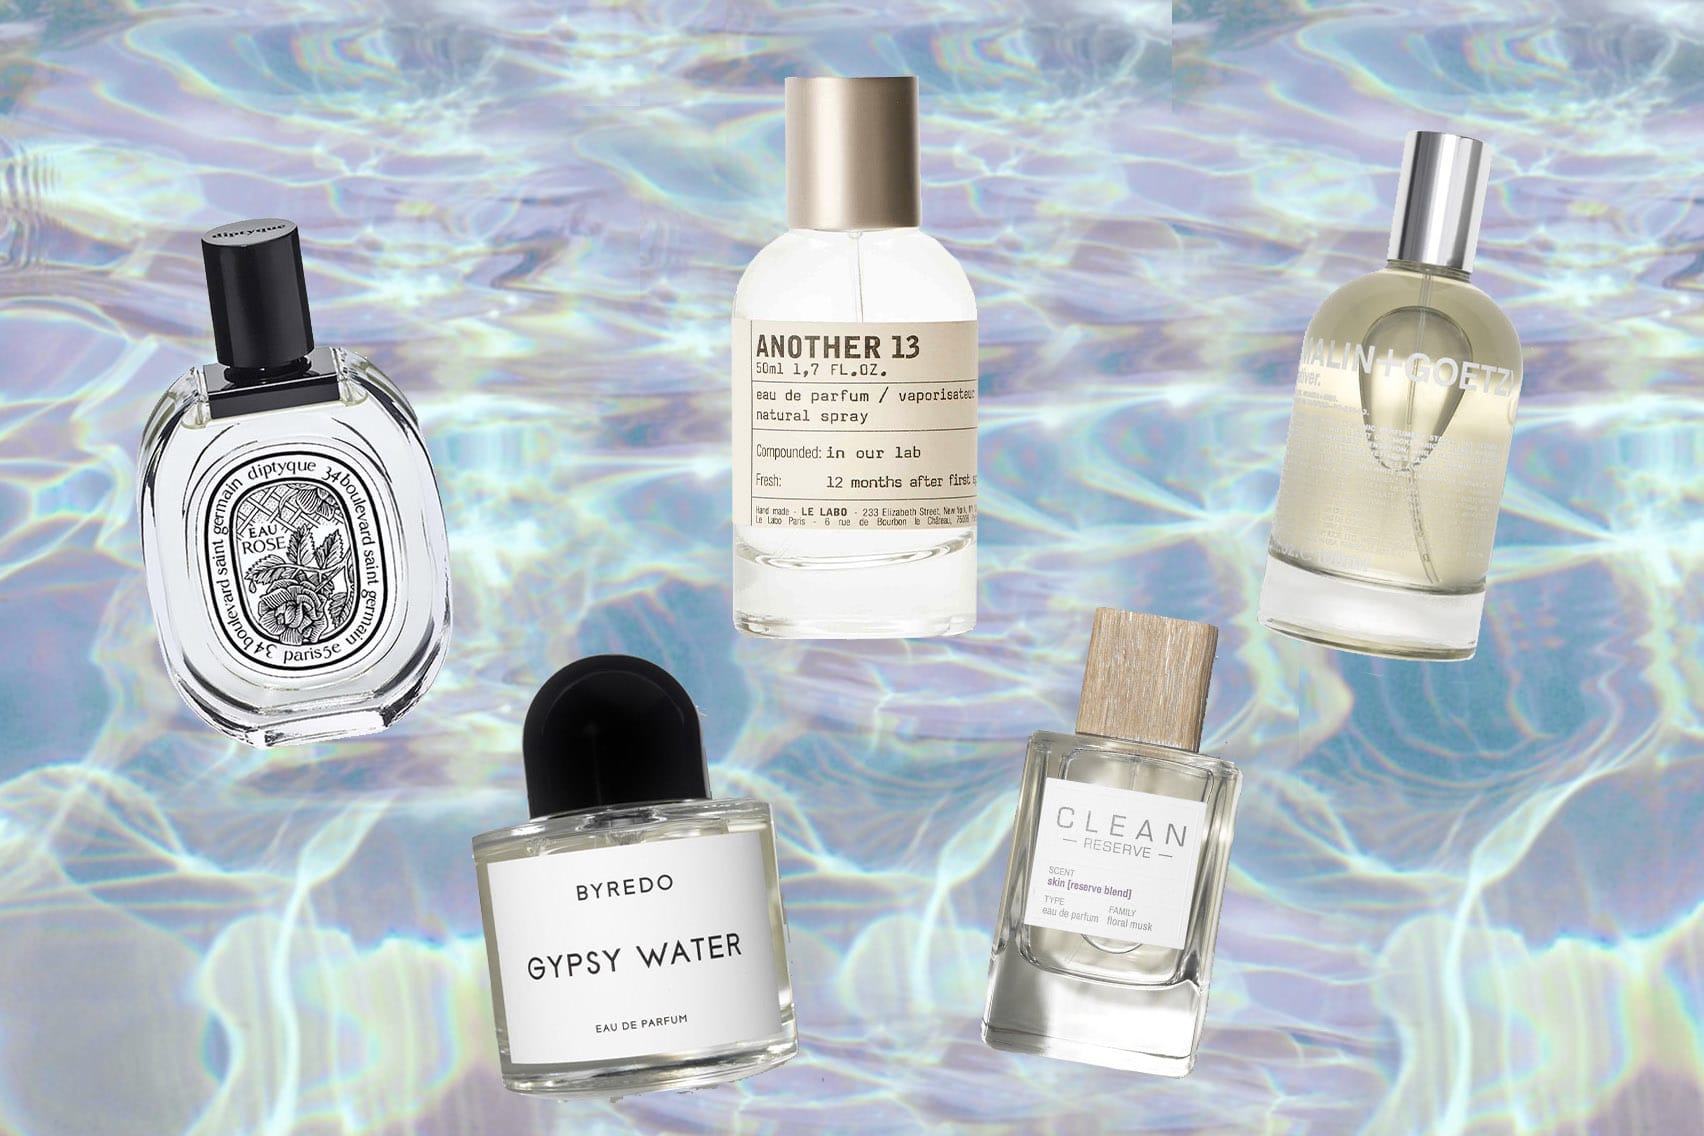 the best summer perfumes 2019